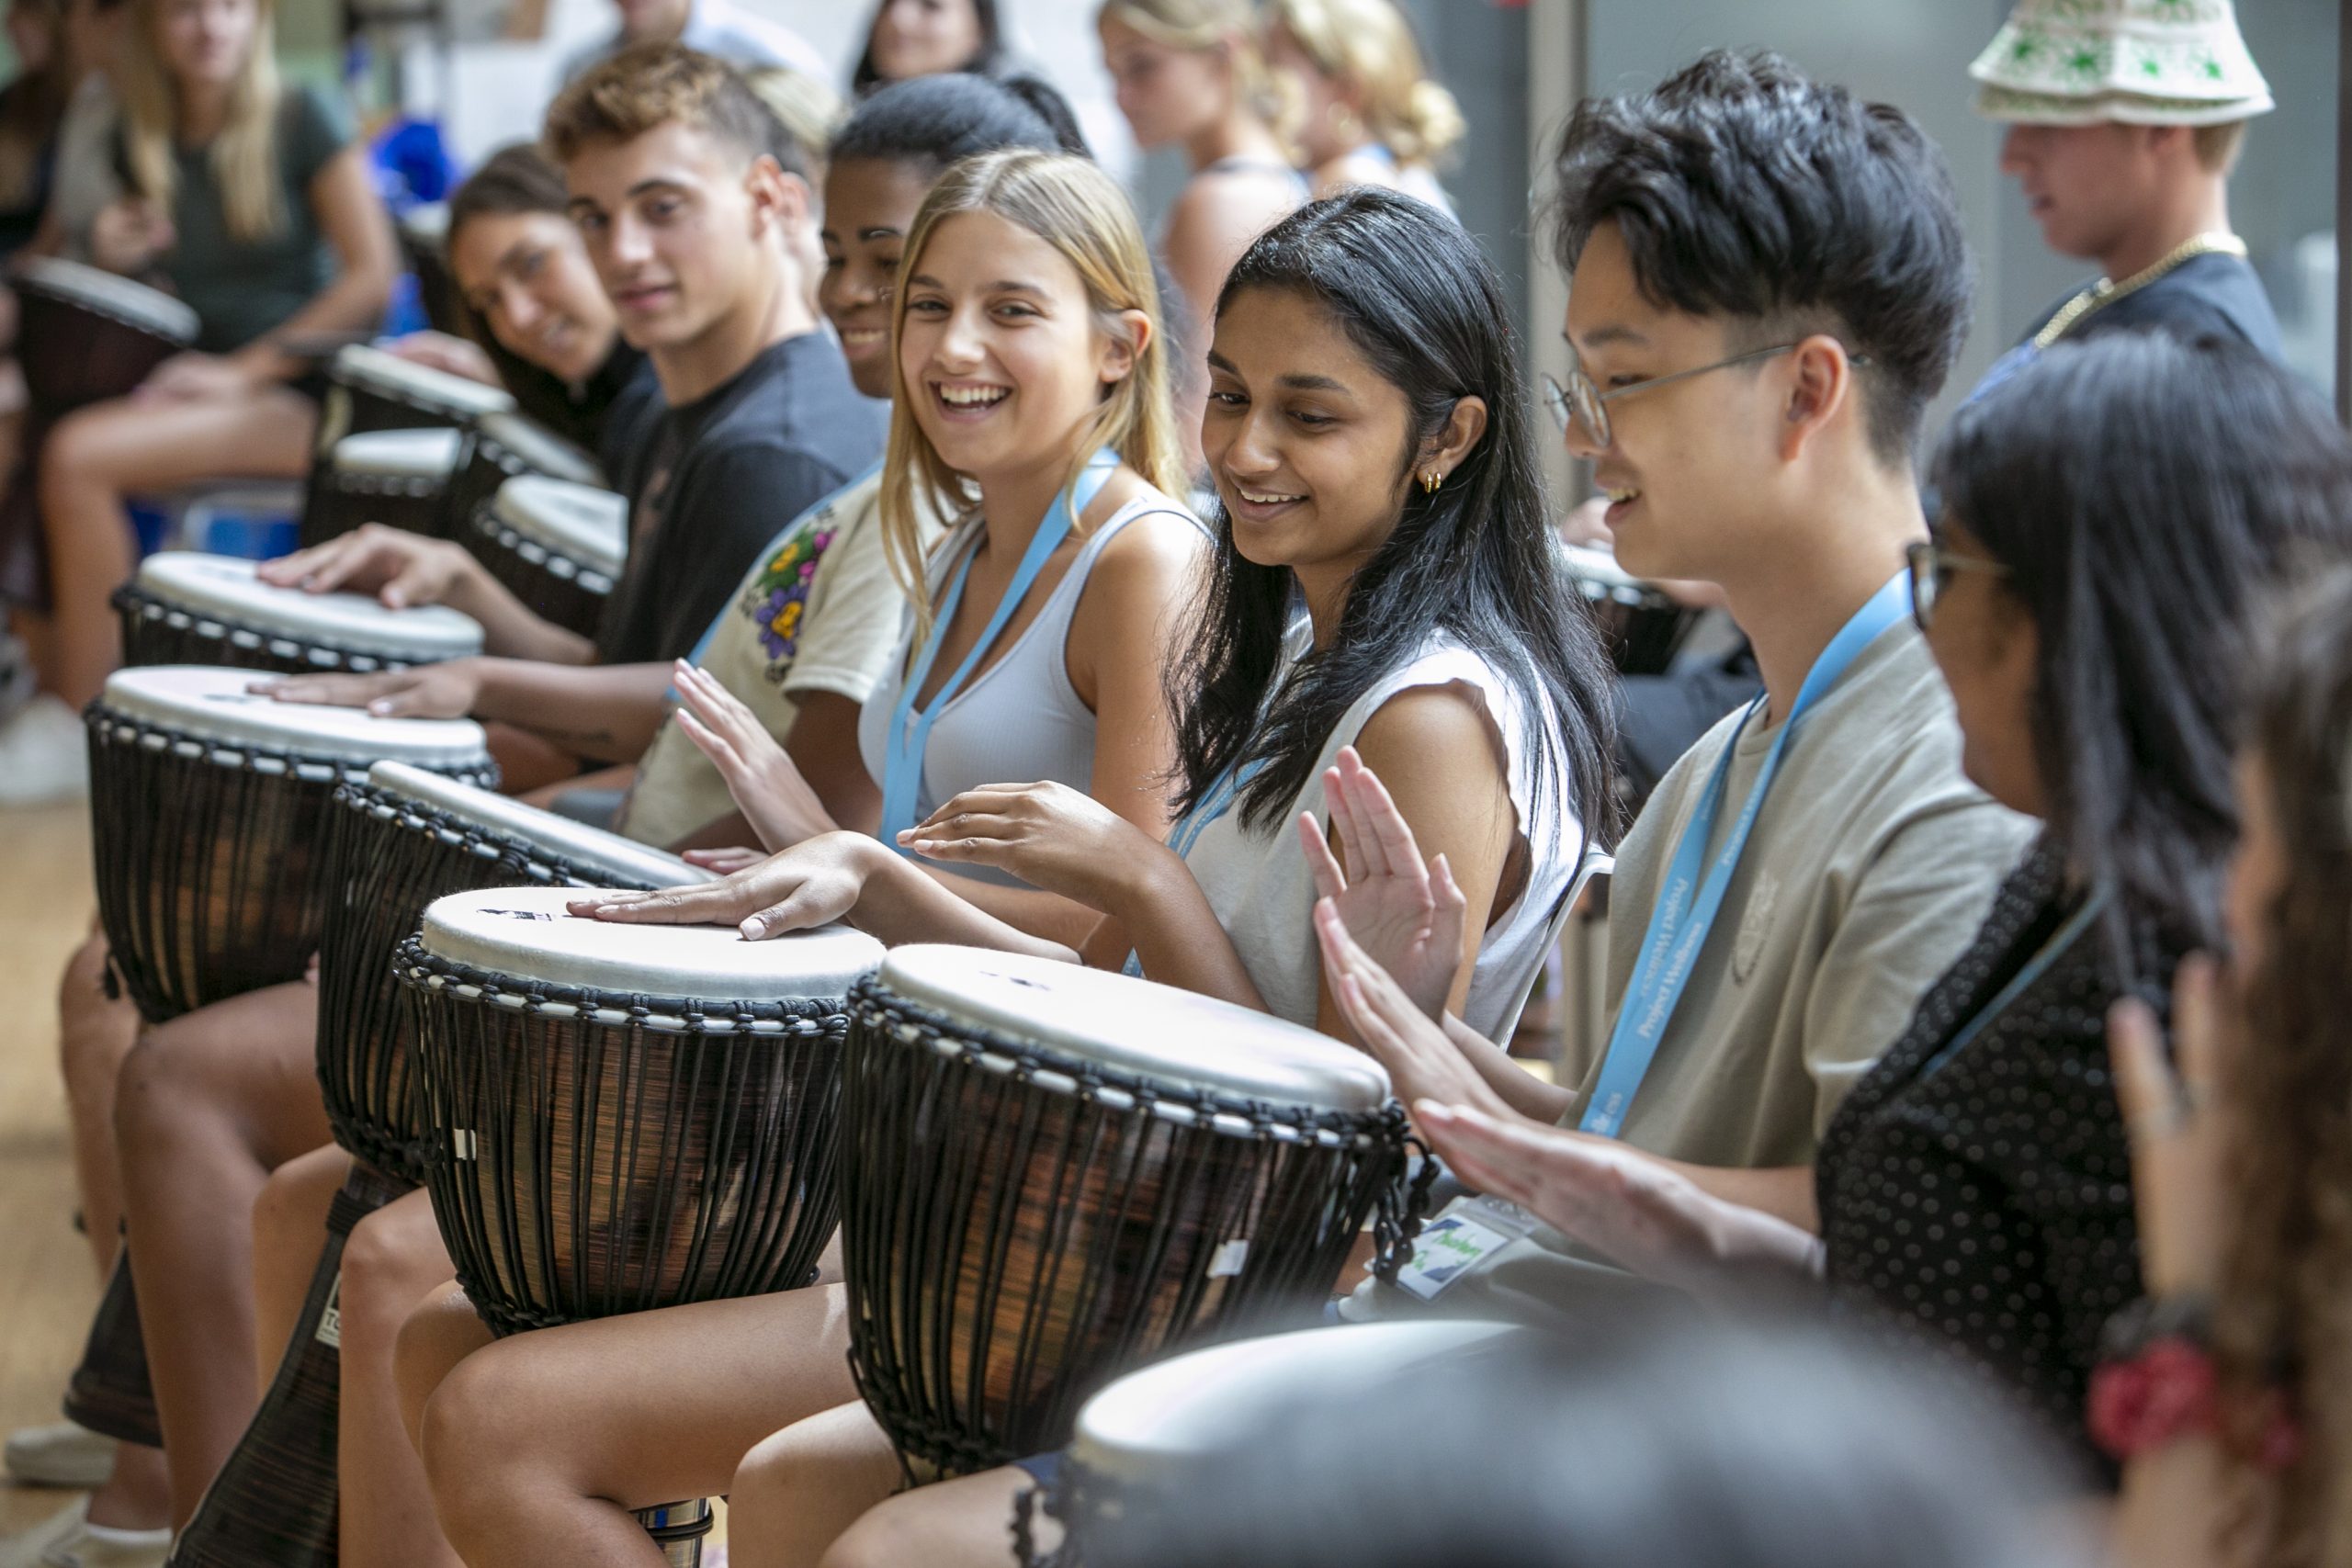 Duke first-year students in Project Wellness participate in a drum circle activity designed to make them feel comfortable expressing themselves and bond together in the Student Wellness Center.